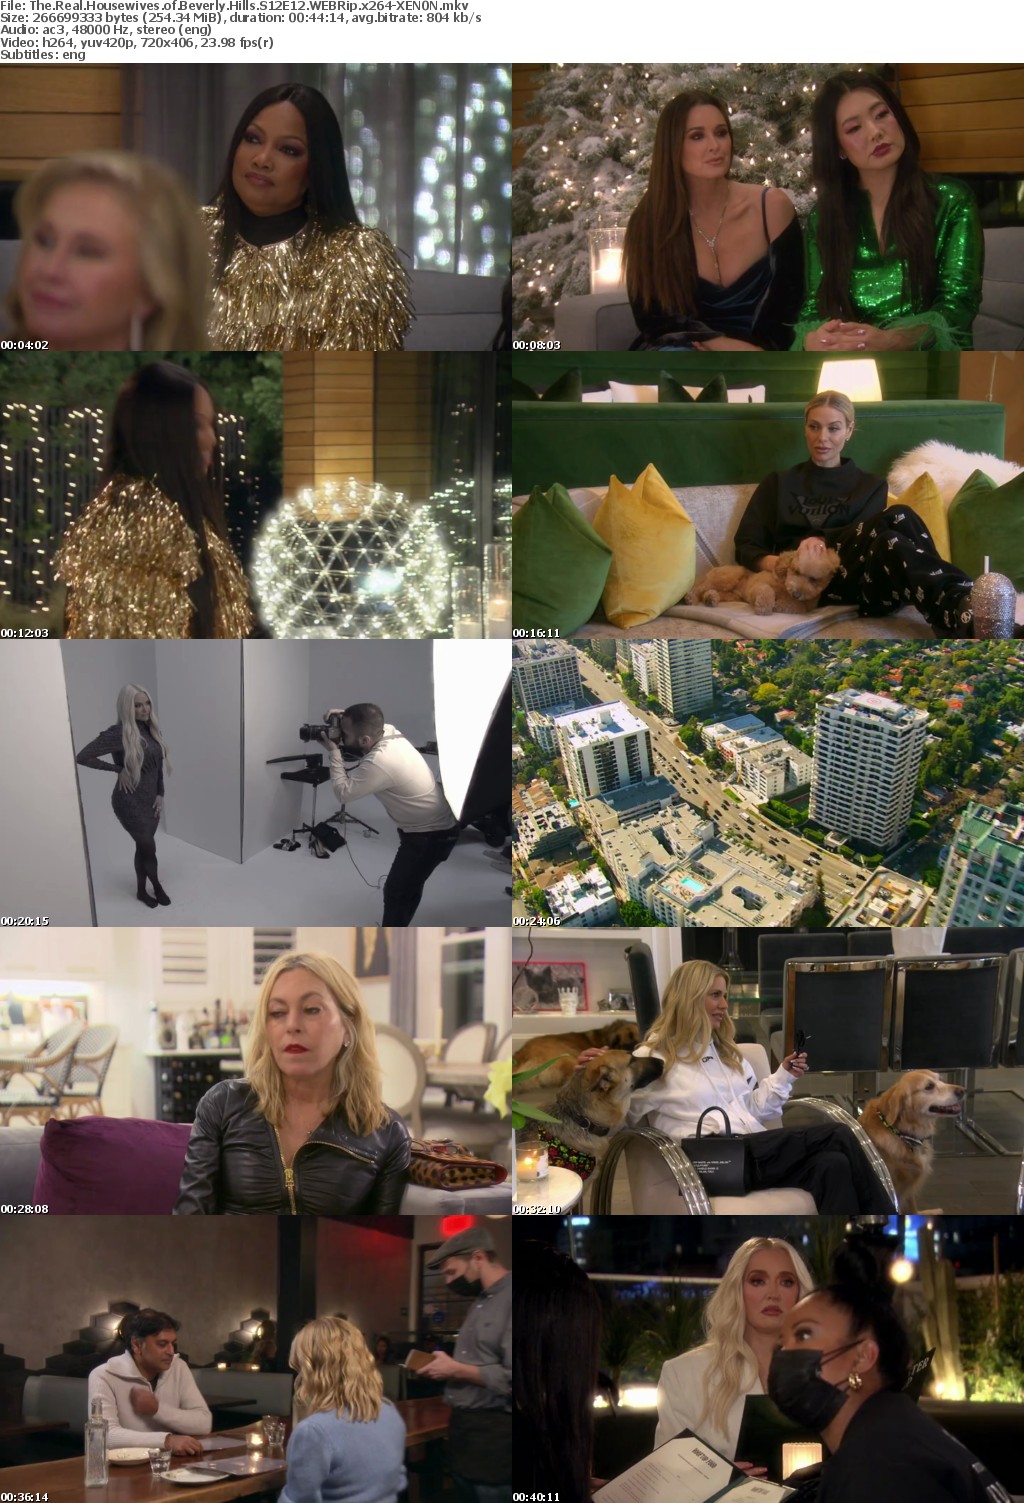 The Real Housewives of Beverly Hills S12E12 WEBRip x264-XEN0N